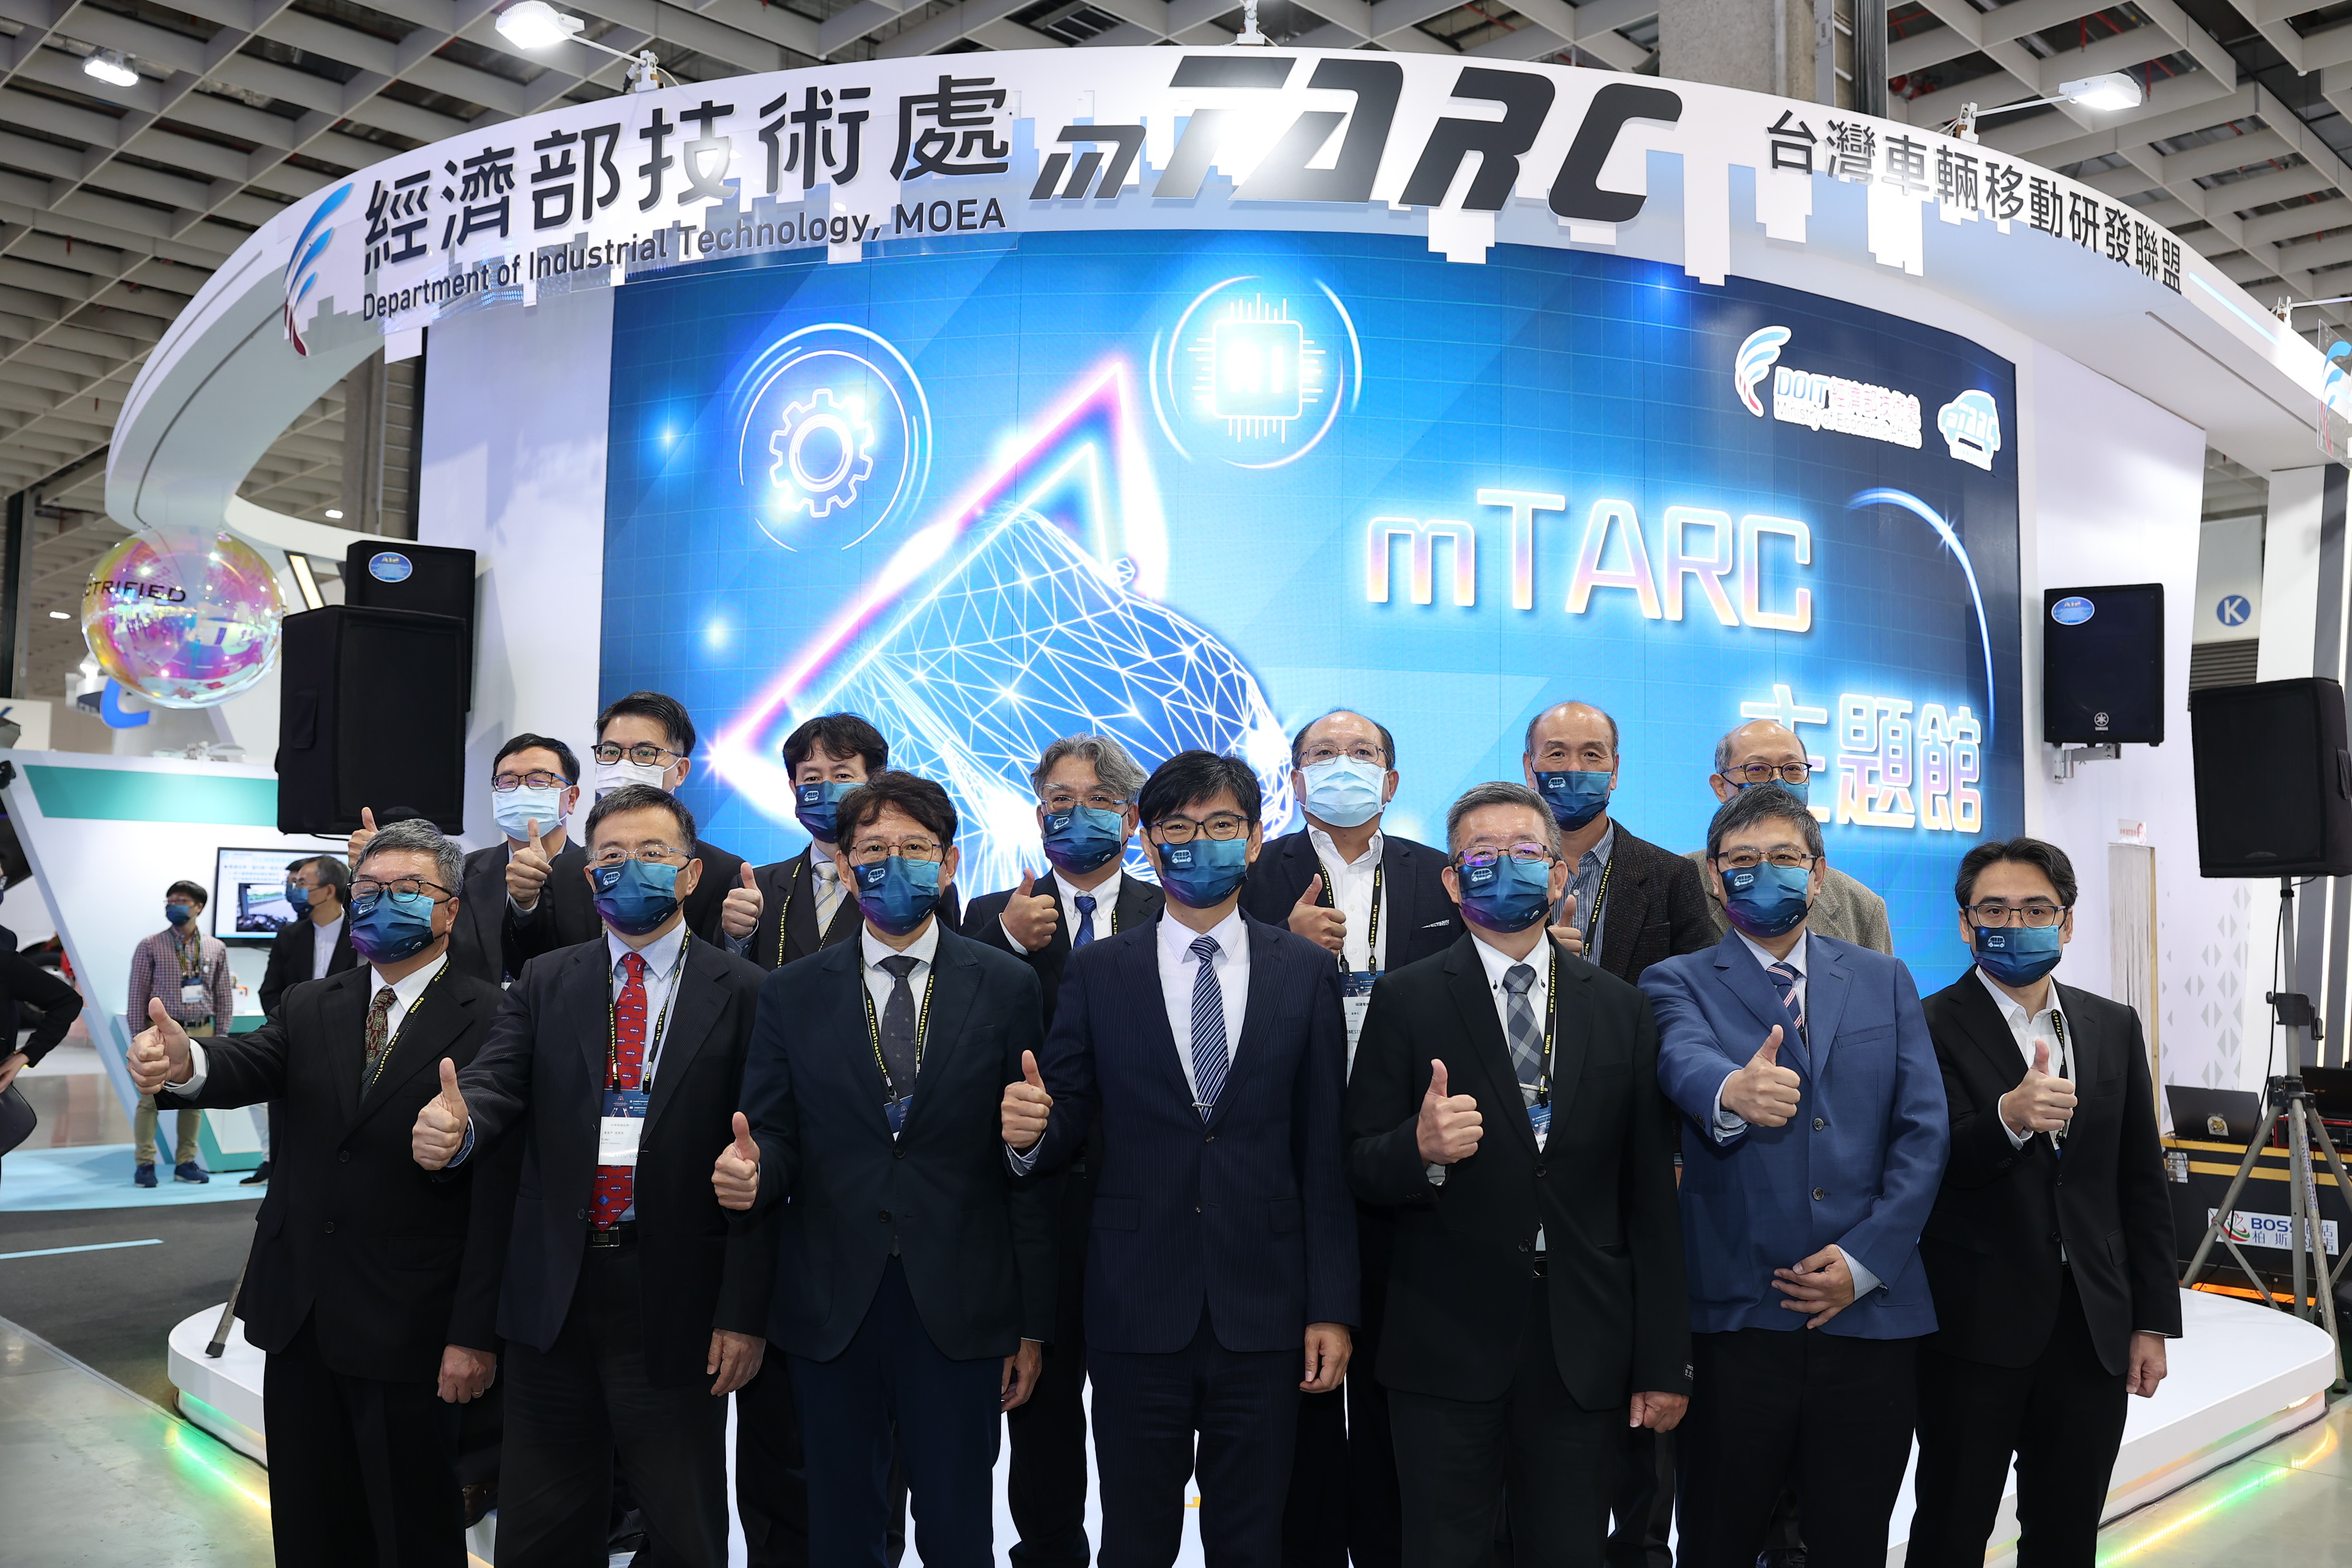 2022 Autotronics Taipei - mobility Taiwan Automotive Research Consortium of Department of Industrial Technology, Ministry of Economic Affairs Pavilion.